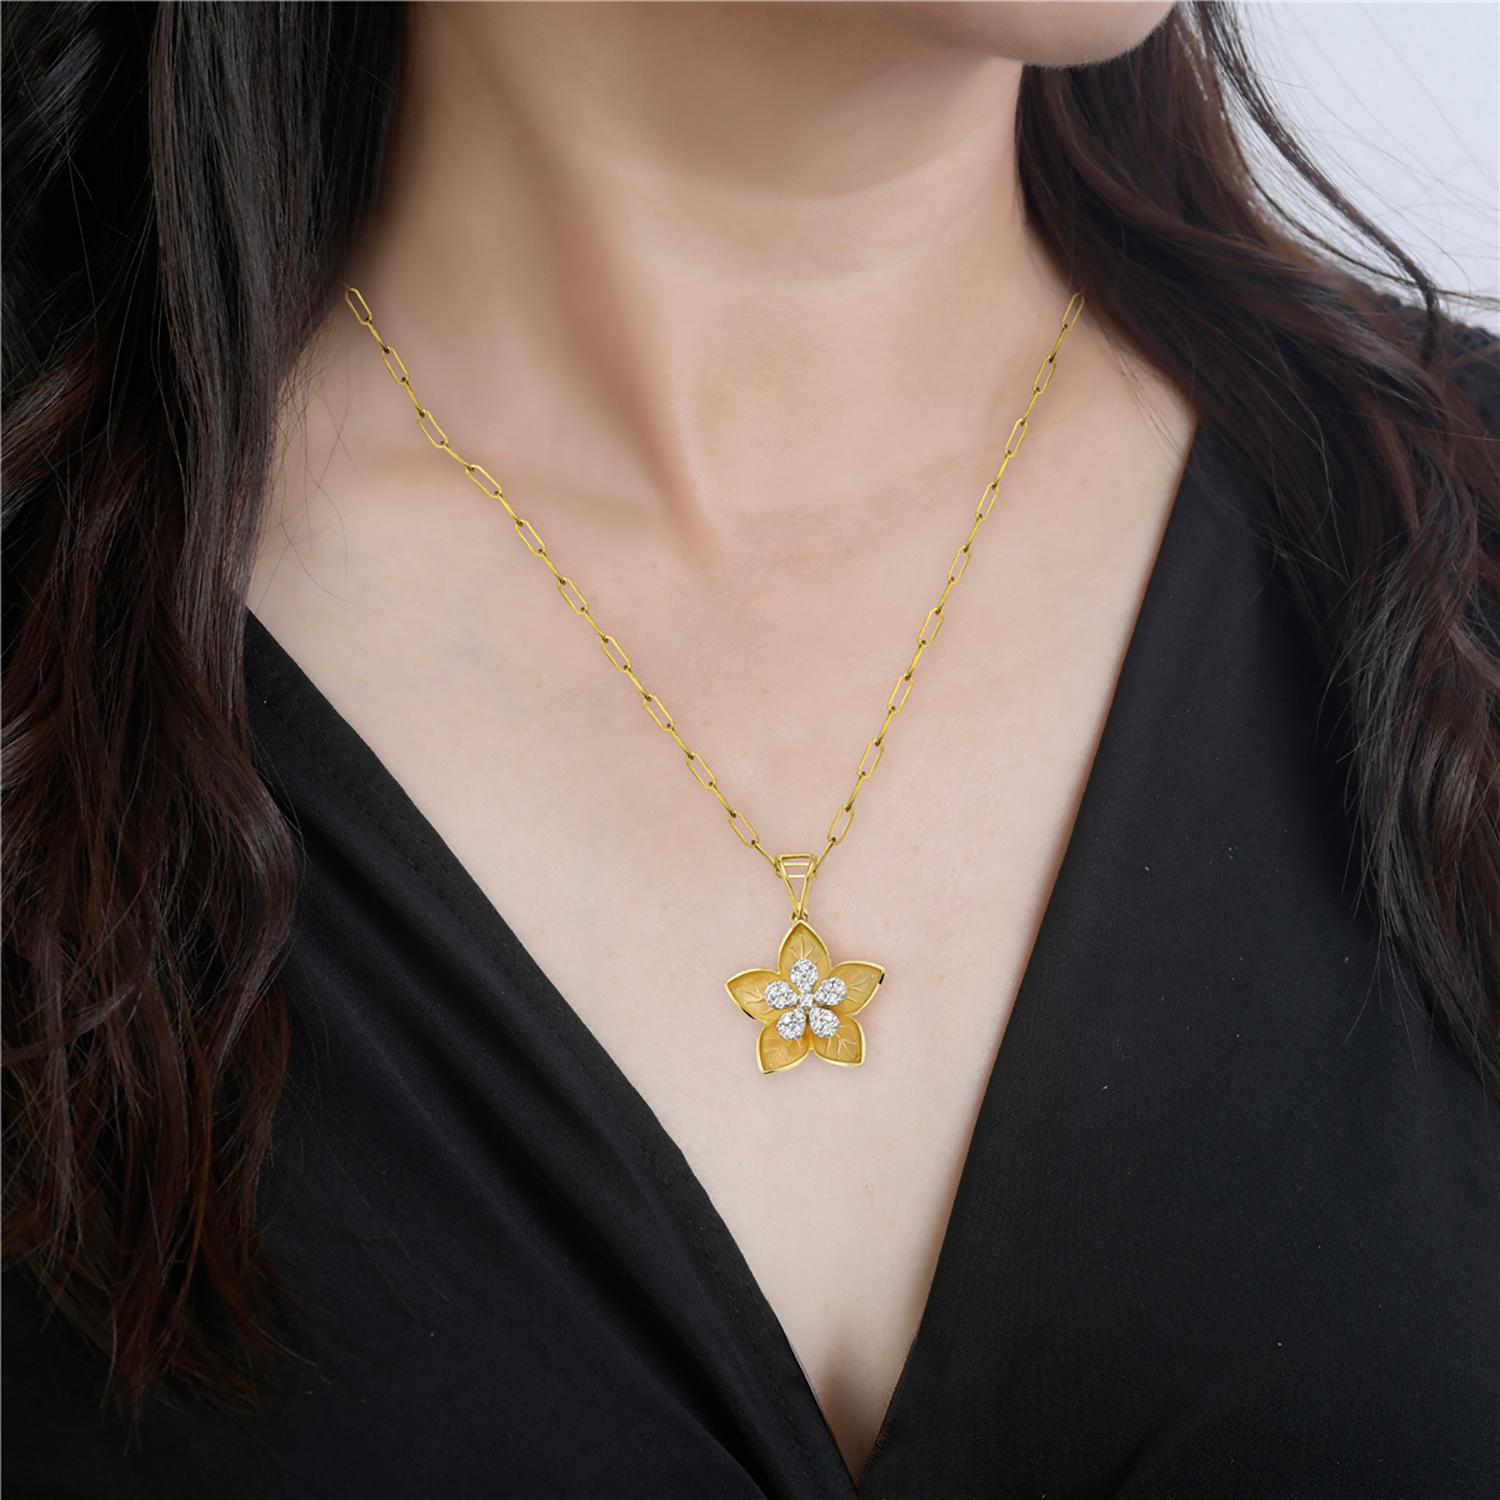 This exquisite pendant showcases a beautifully carved flower shape crafted from lustrous 14k yellow gold and is adorned with dazzling diamonds that radiate brilliance and elegance. The attention to detail and intricate design of the pendant make it